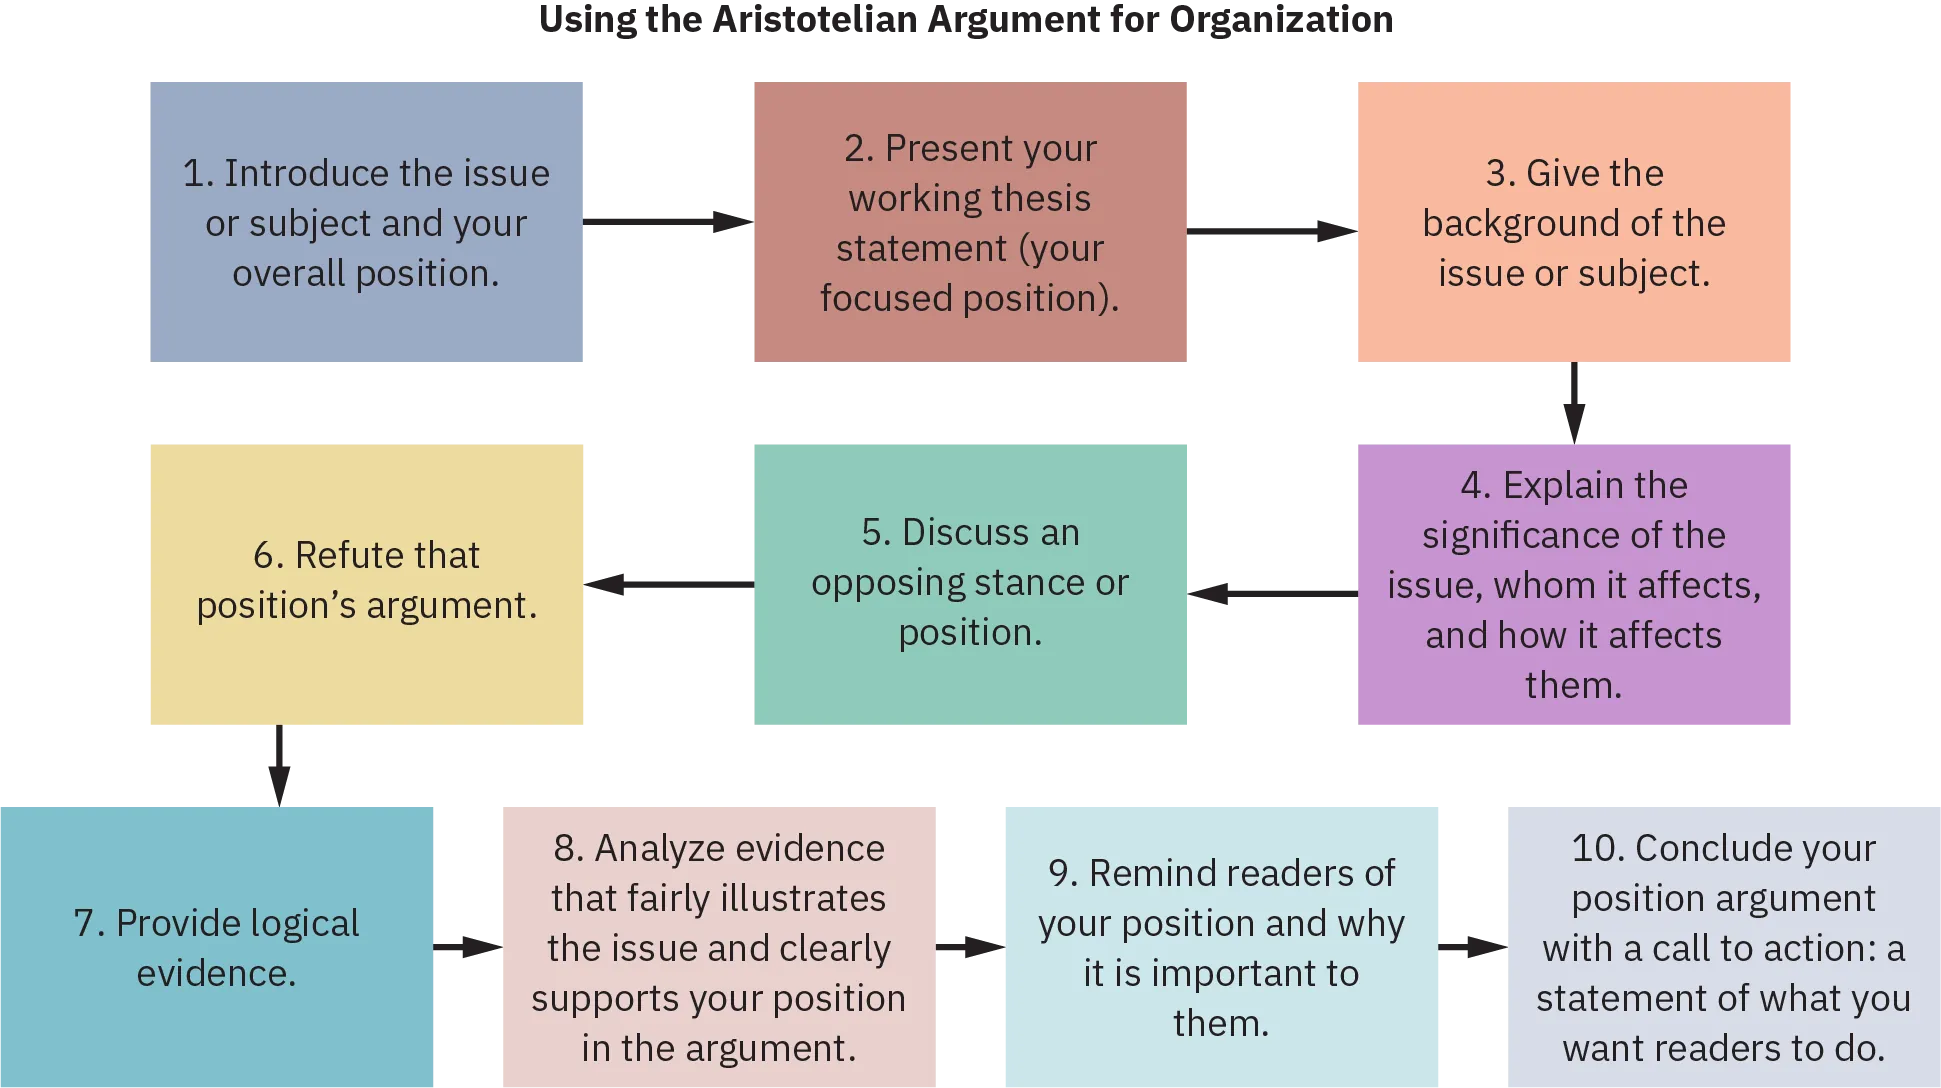 A flow chart titled “Using the Aristotelian Argument for Organization” connects multi-colored rectangles of the same size via arrows. The ten rectangular boxes read, “Introduce the issue or subject and your overall position”; “Present your working thesis statement (your focused position)”; “Give the background of the issue or subject”; “Explain the significance of the issue, whom it affects, and how it affects them”; “Discuss an opposing stance or position”; “Refute that position’s argument”; “Provide logical evidence”; “Analyze evidence that fairly illustrates the issue and clearly supports your position in the argument”; “Remind readers of your position and why it is important to them” ; and “Conclude your position argument with a call to action: a statement of what you want readers to do.”